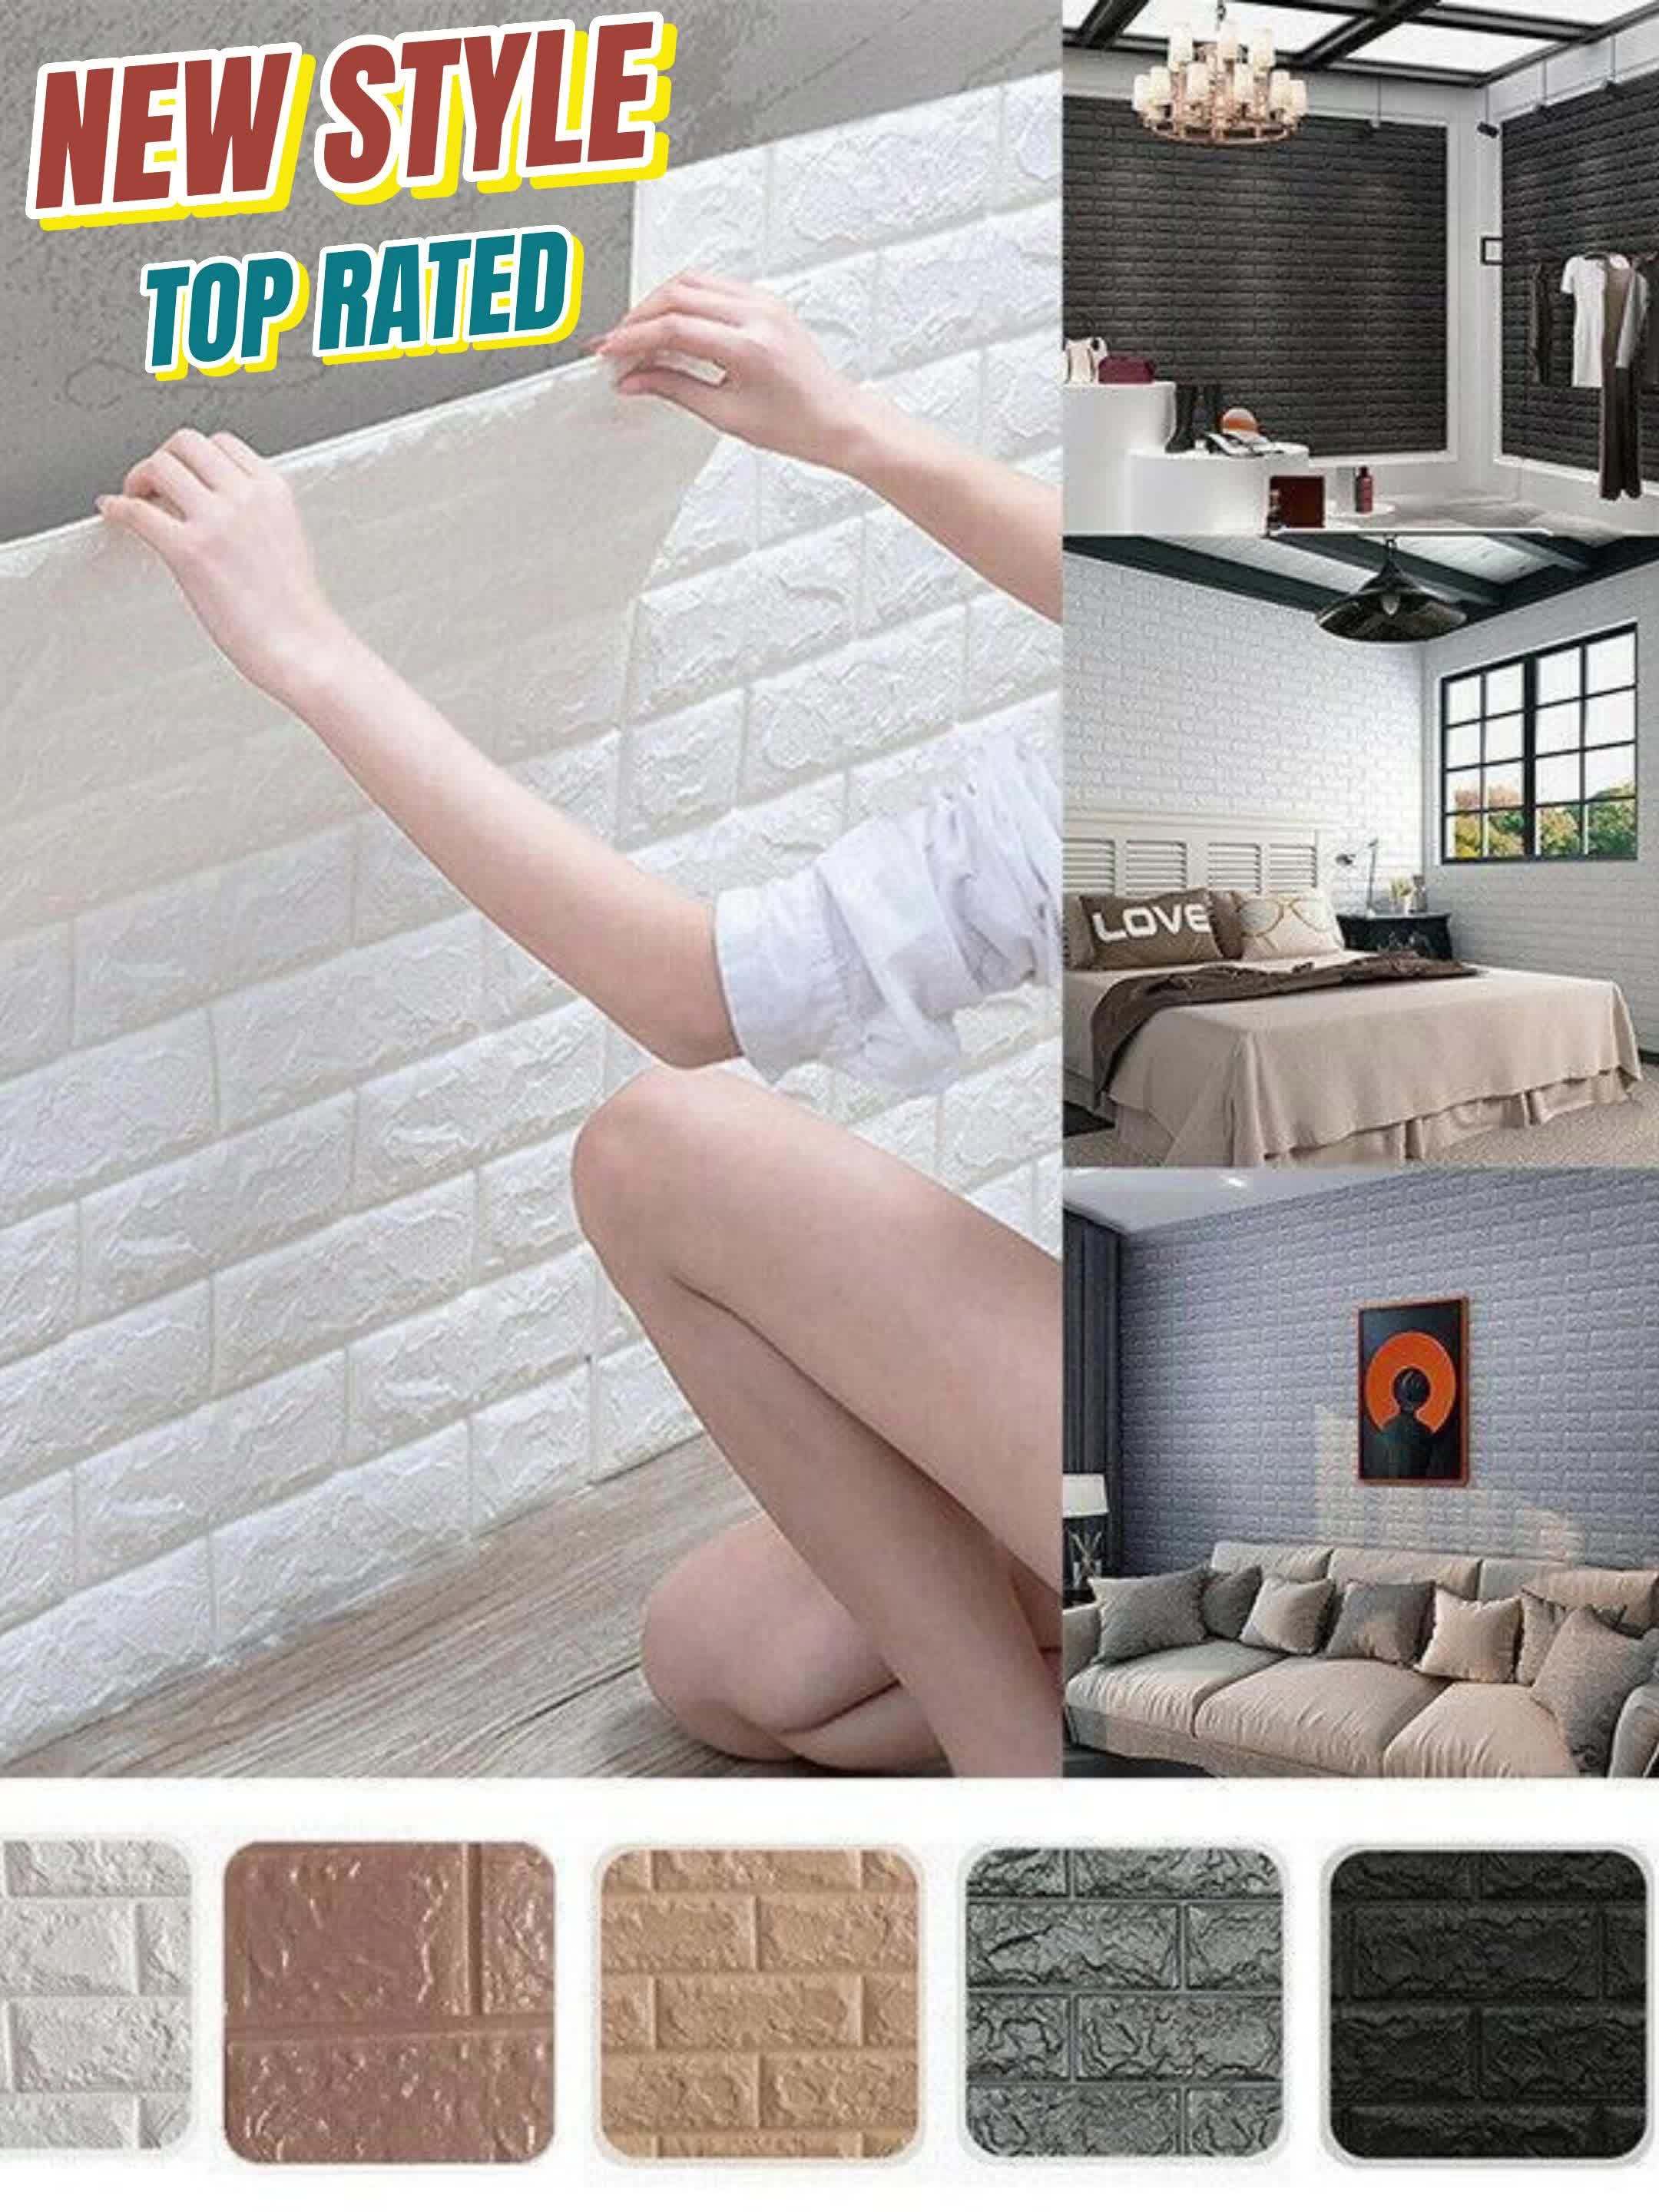 40/50/60 Pieces Diy 3d Foam Brick Pattern Wallpaper, 3d Foam Square  Waterproof Wall Sticker For Wall Background Bedroom Living Room, (Inch,  Color Optional)